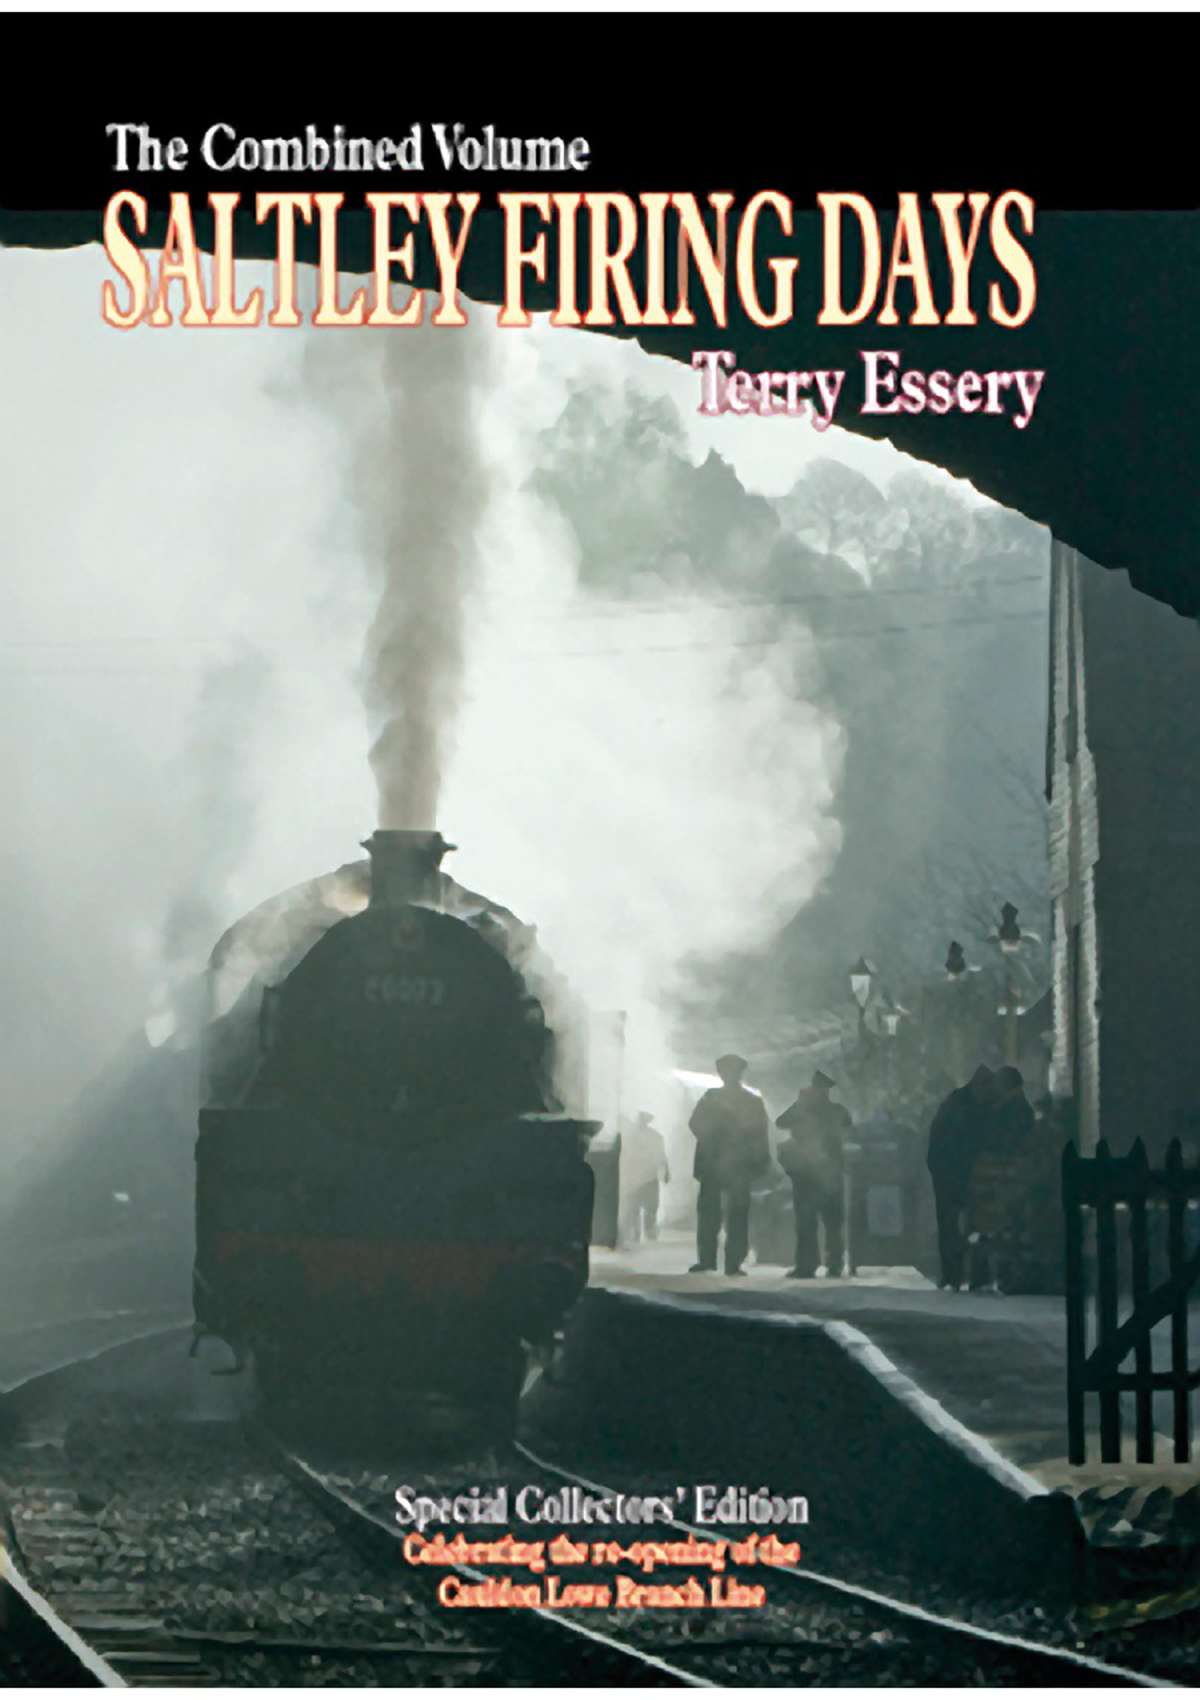 3665 - Saltley Firing Days: The Combined Volume